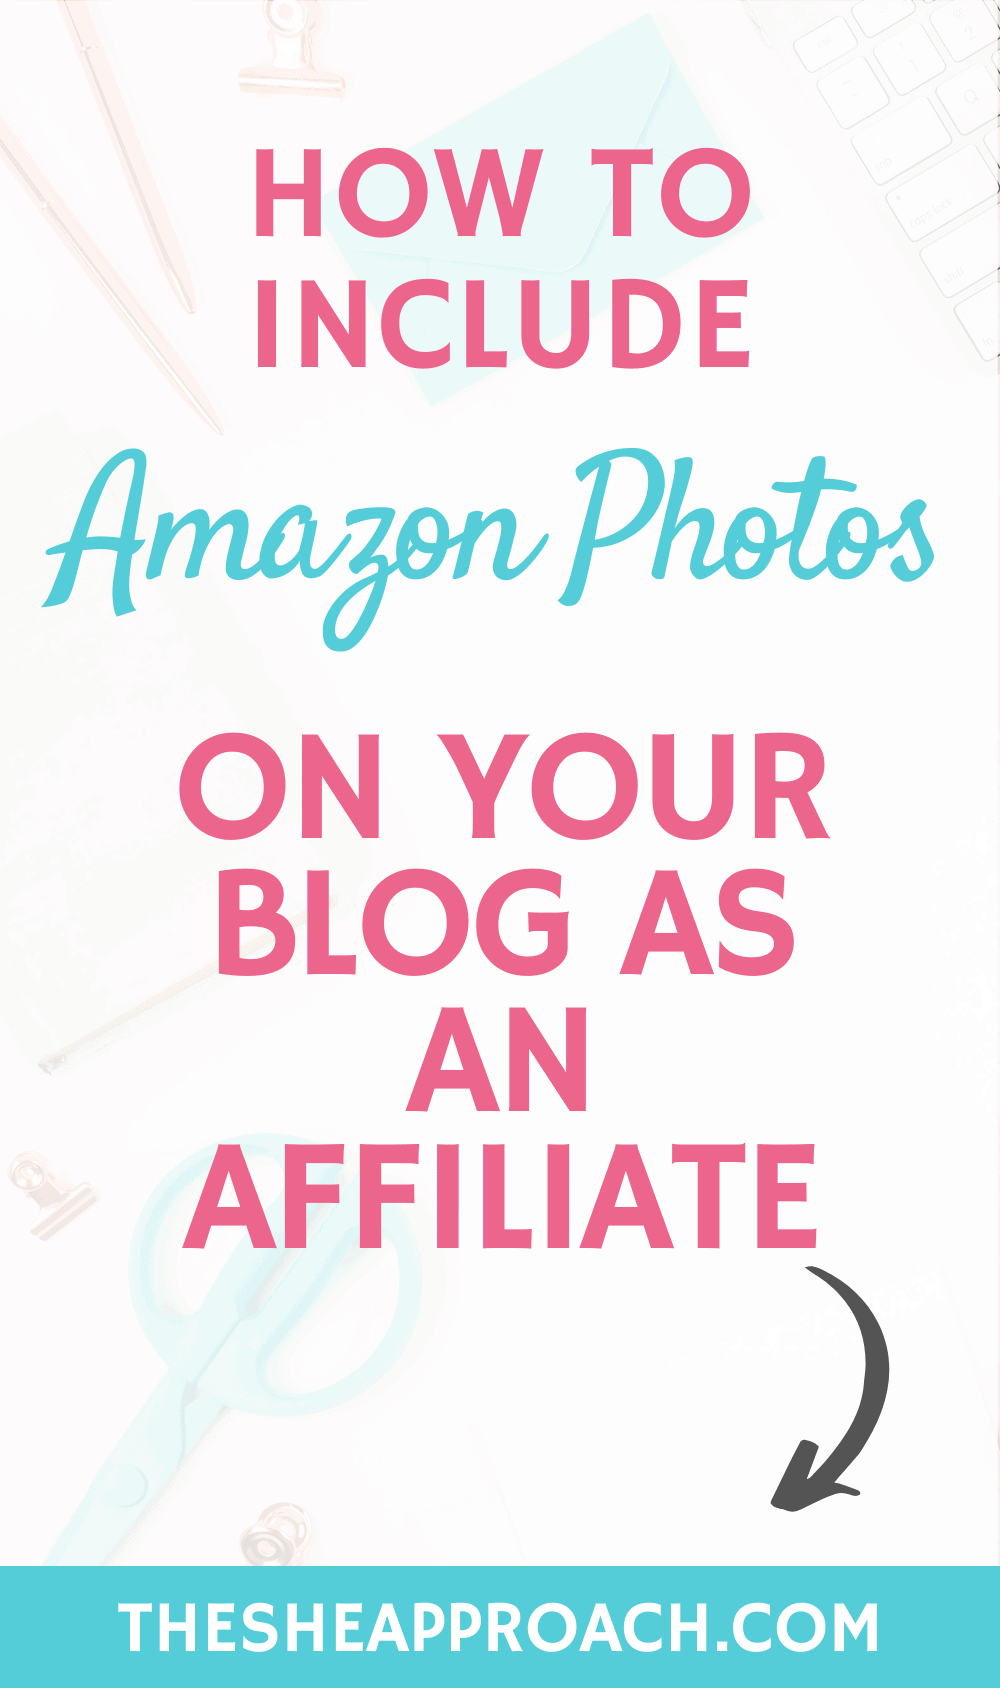 How to Add Amazon Affiliate Links and Images to WordPress Blog Posts